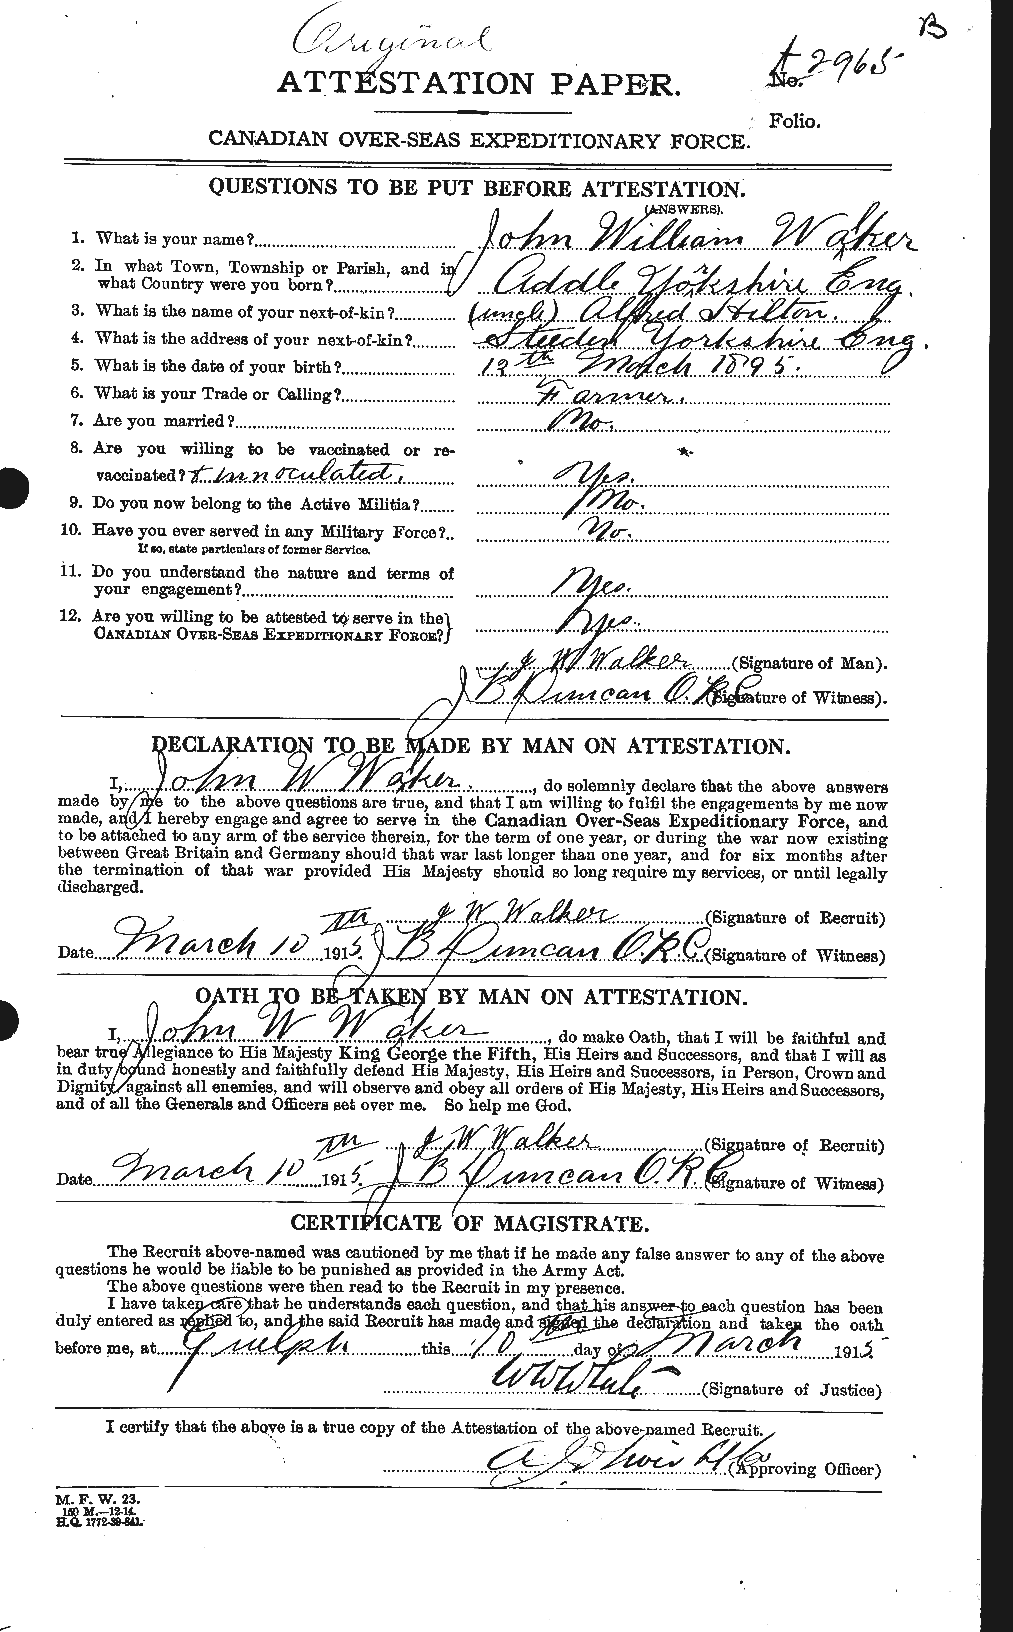 Personnel Records of the First World War - CEF 653166a